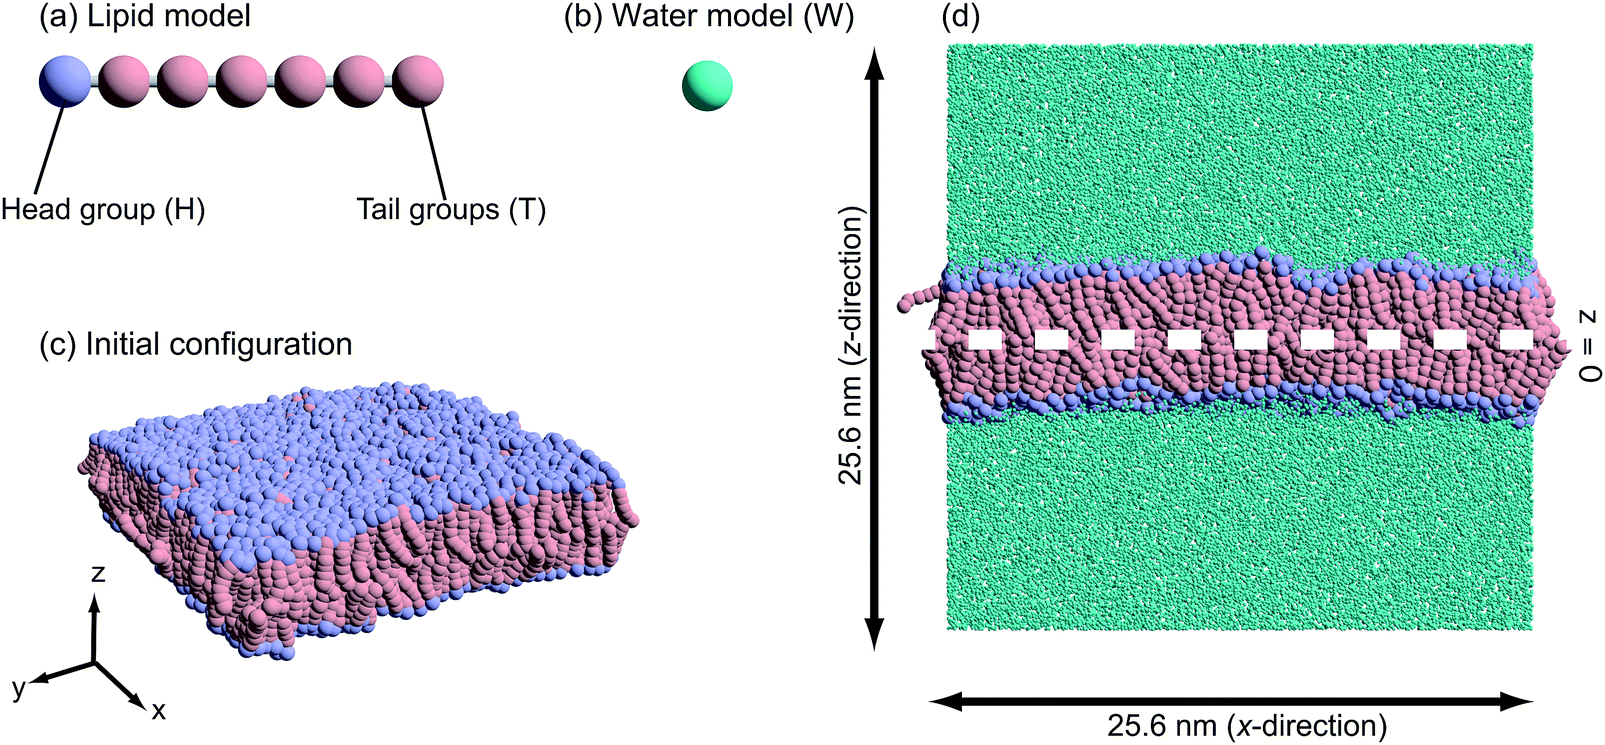 Relationship between water permeation and flip-flop motion in a bilayer  membrane - Physical Chemistry Chemical Physics (RSC Publishing)  DOI:10.1039/C8CP04610G